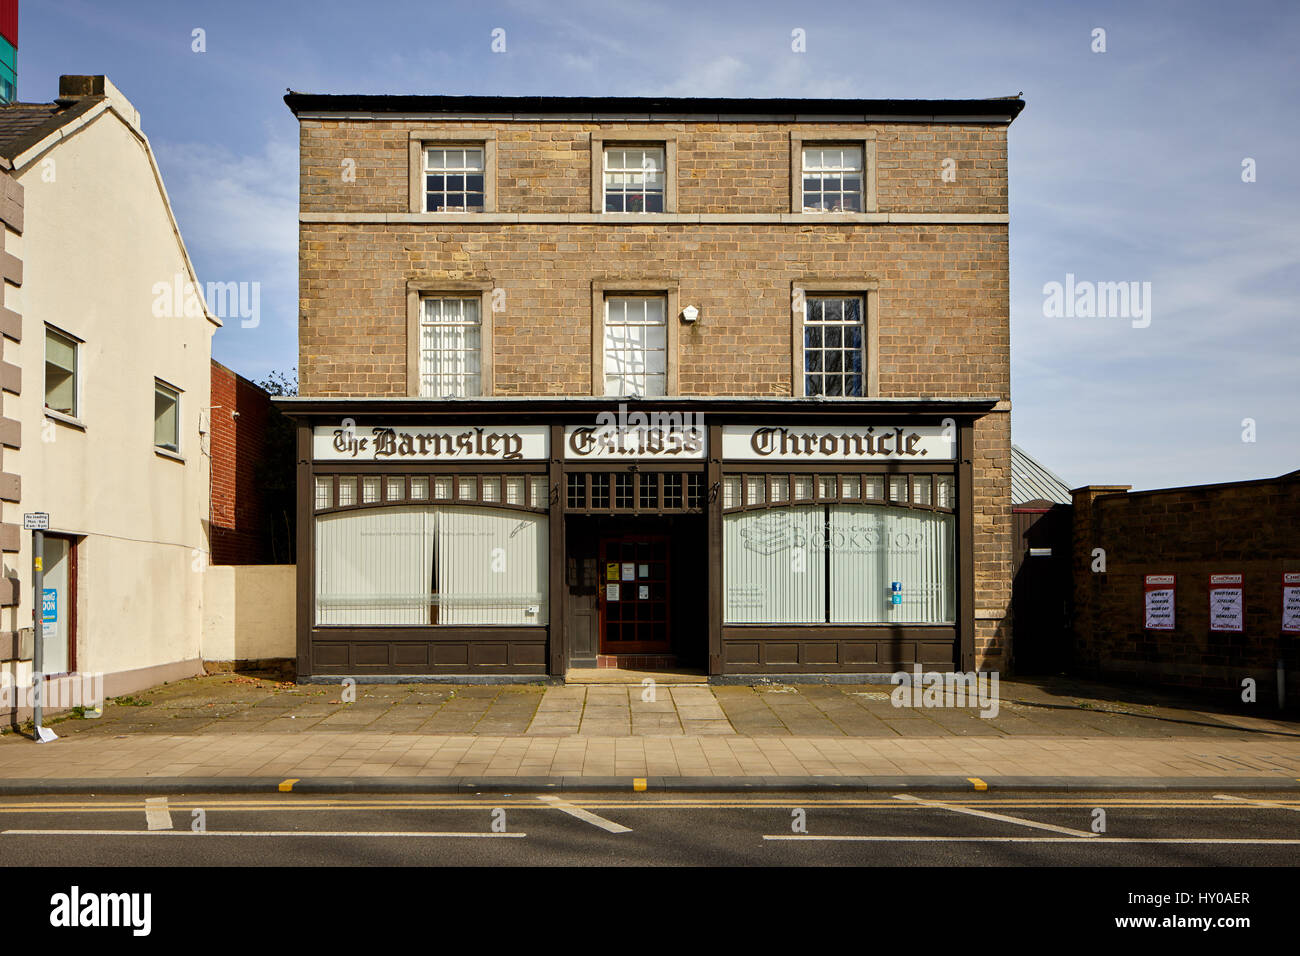 Le journal local traditionnel chroniques, Barnsley, South Yorkshire, Angleterre. UK. Banque D'Images